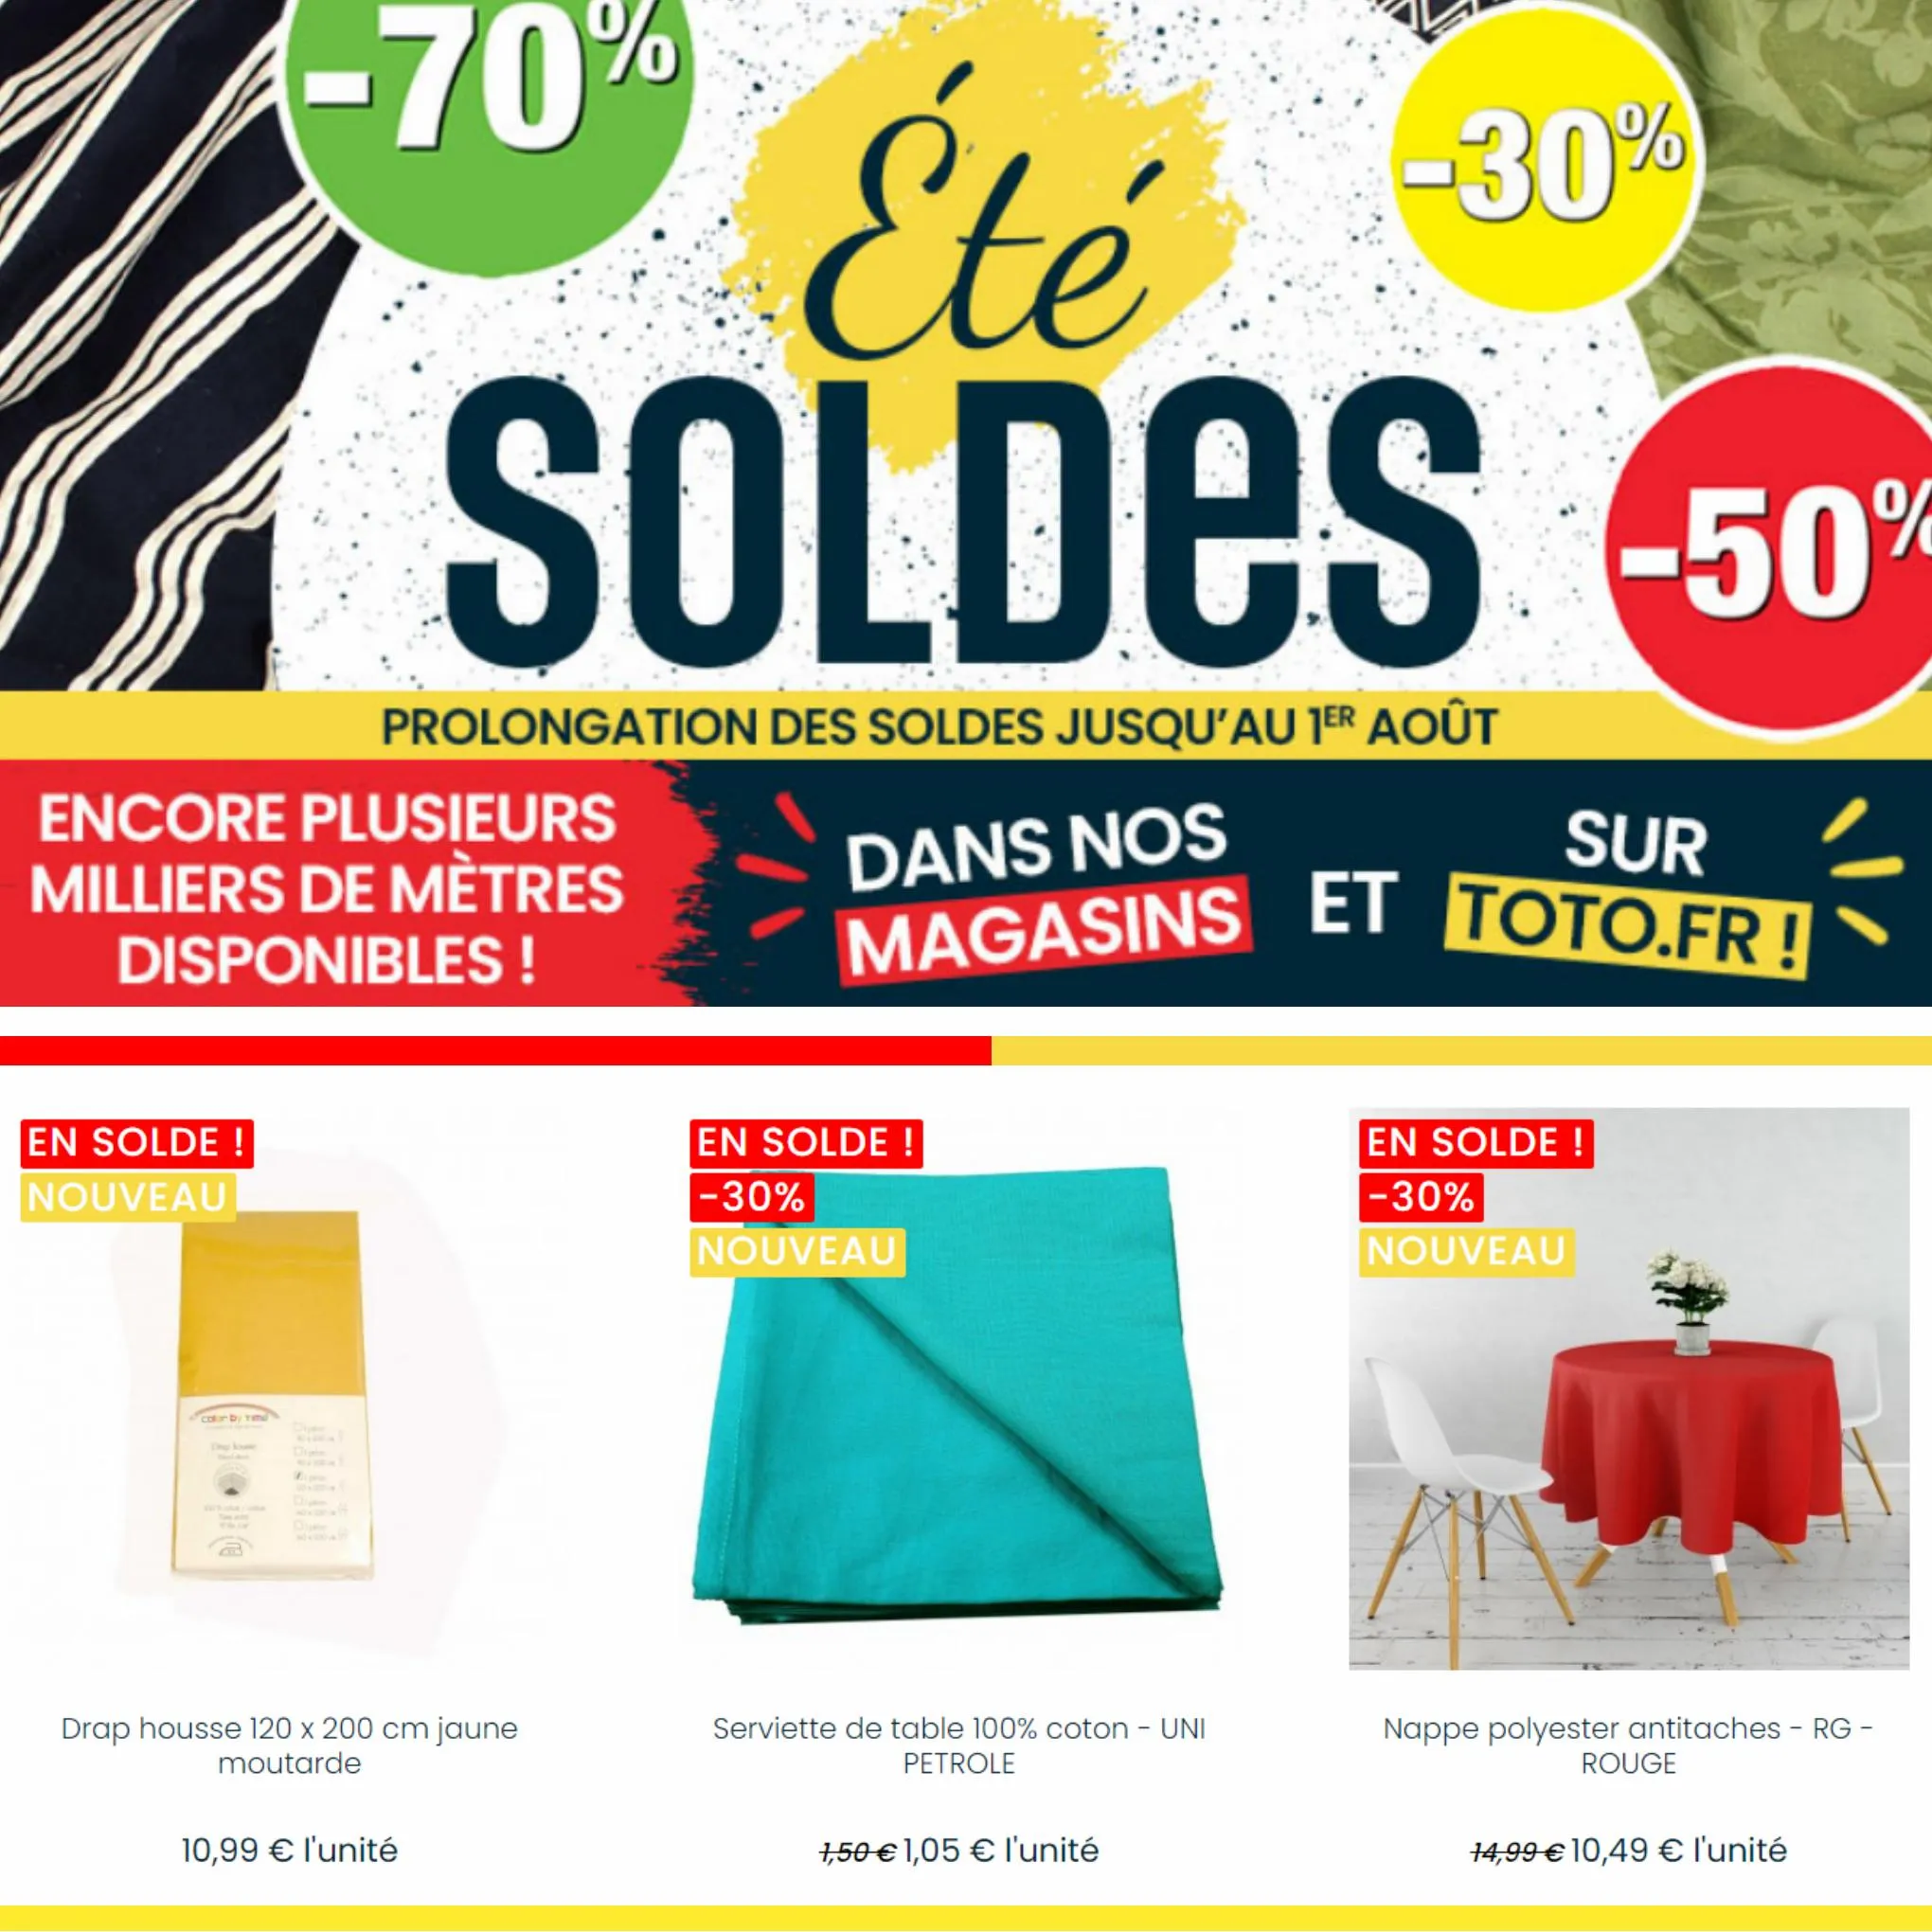 Catalogue Toto Soldes, page 00001